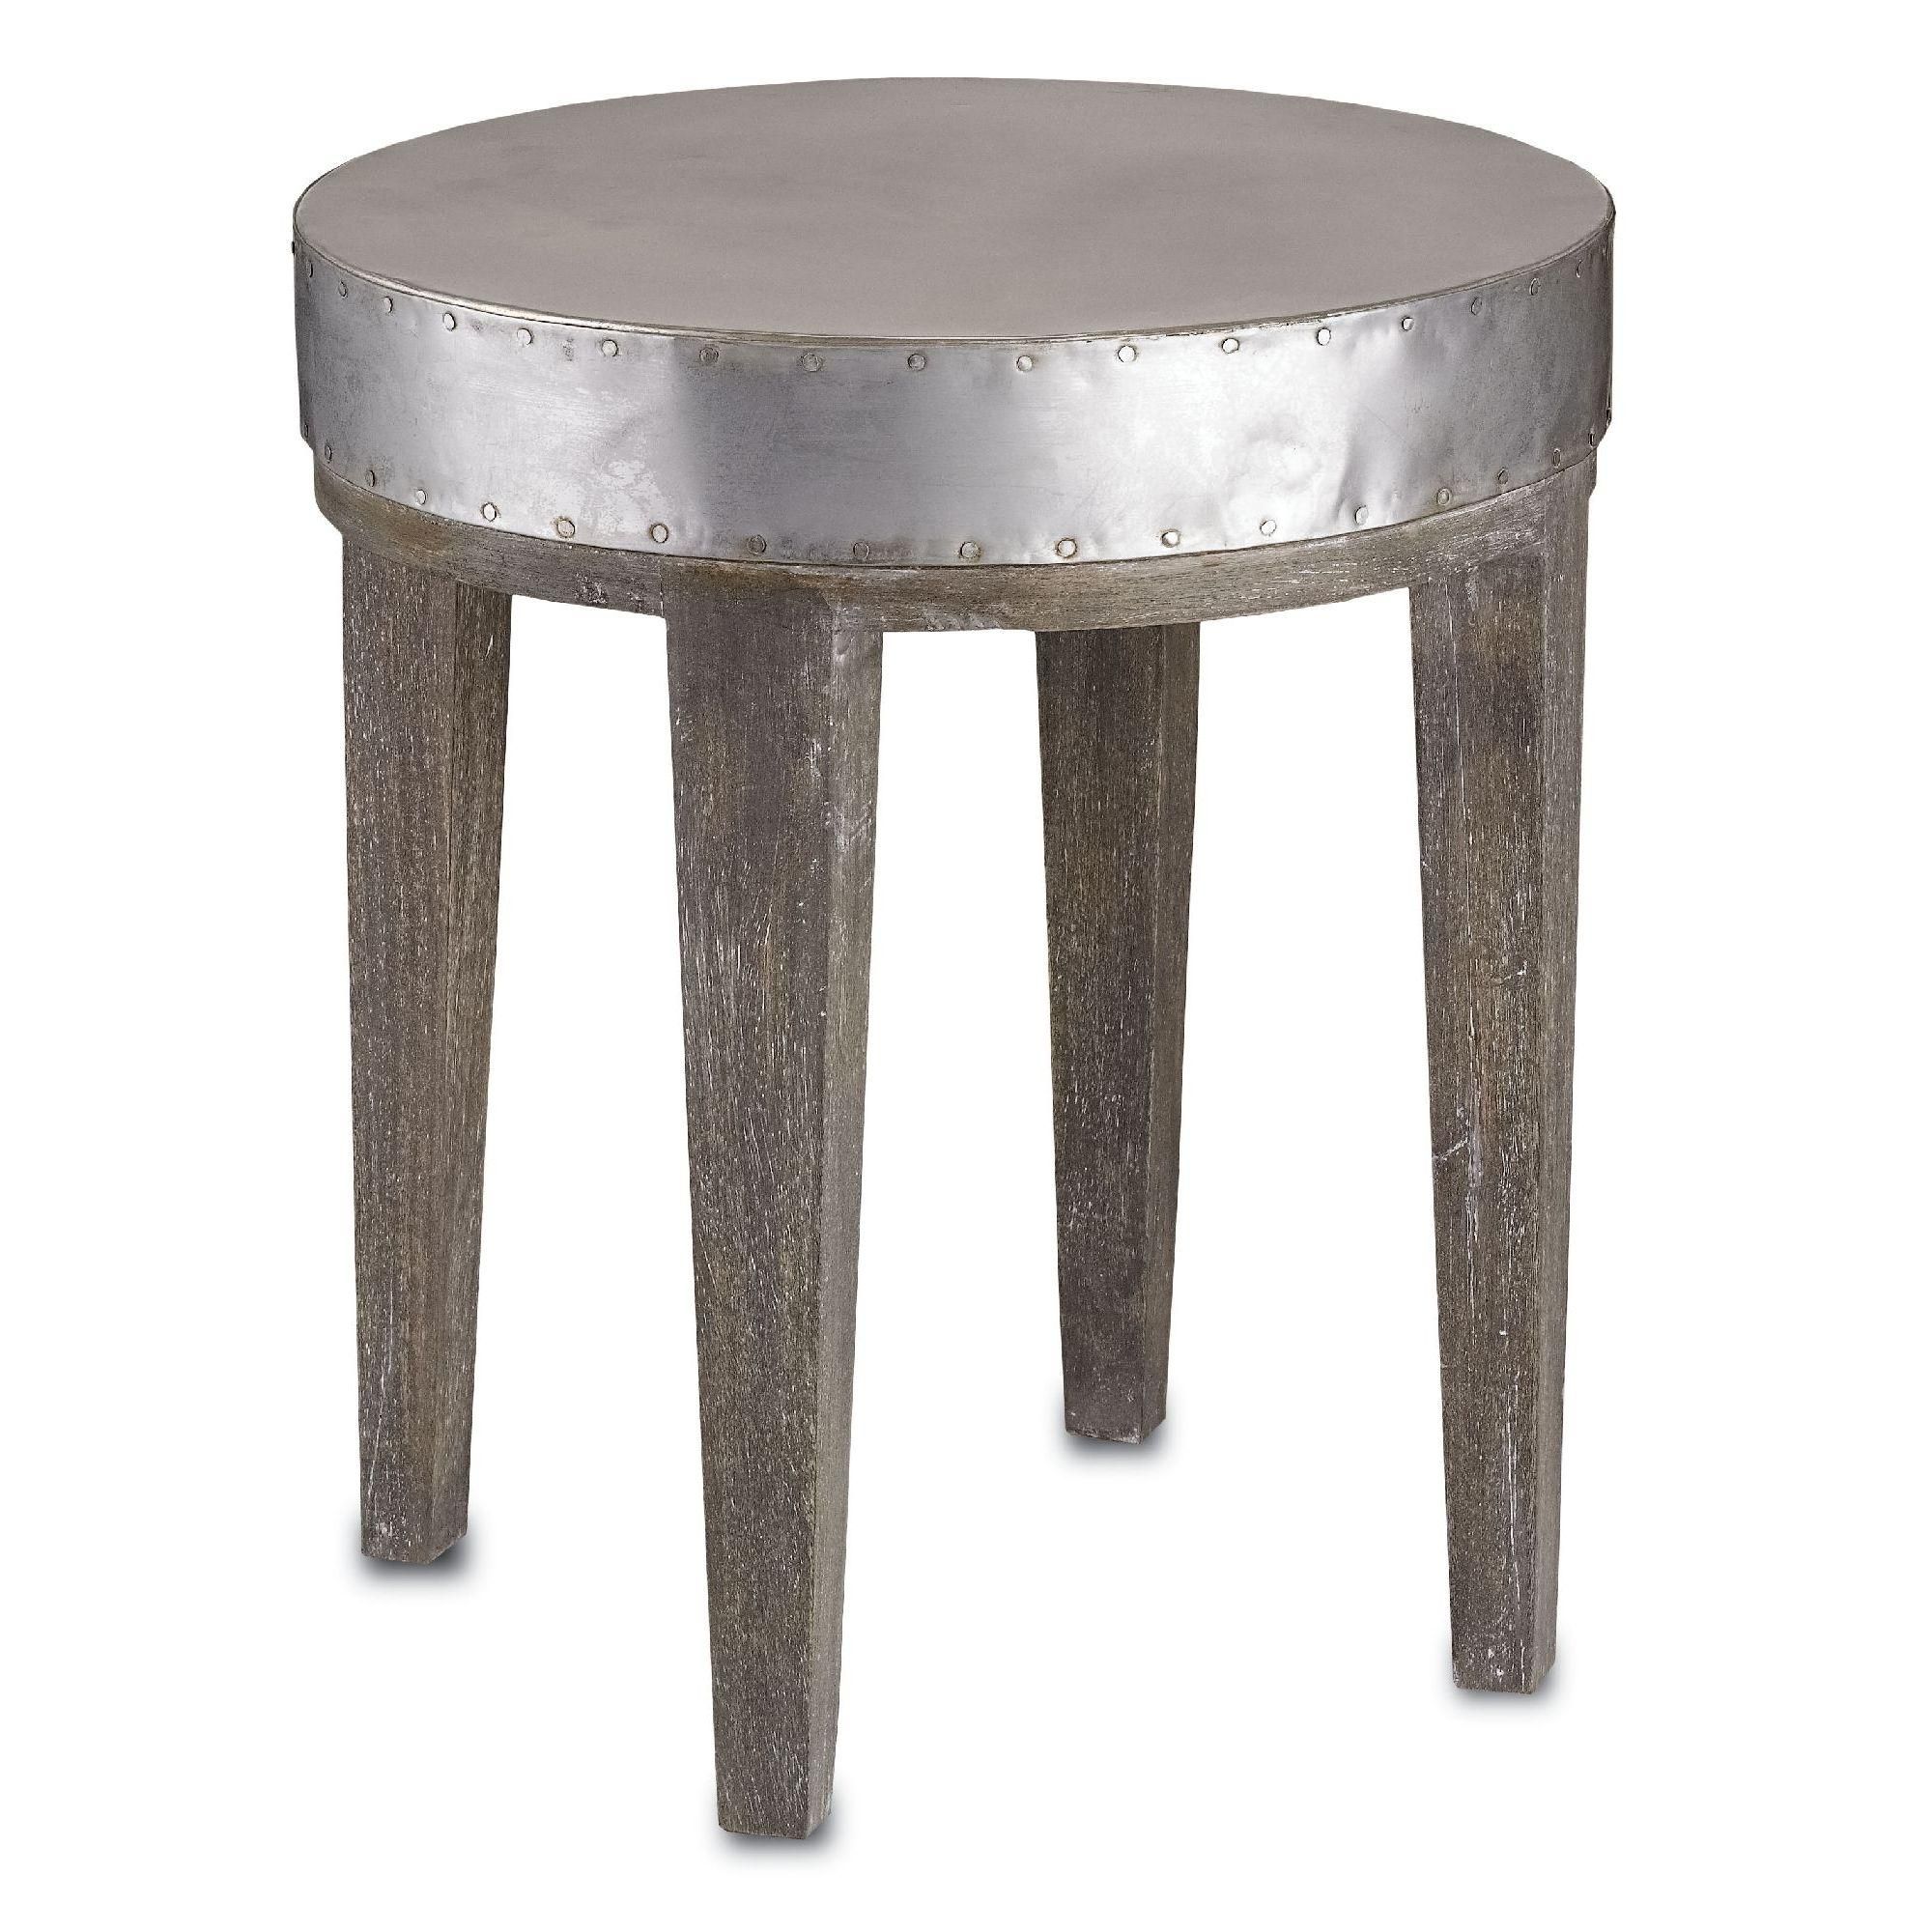 with nod both industrial and chic references this small accent metal table has round top rivet details around the edges there are four gray rugs target blue console teak furniture